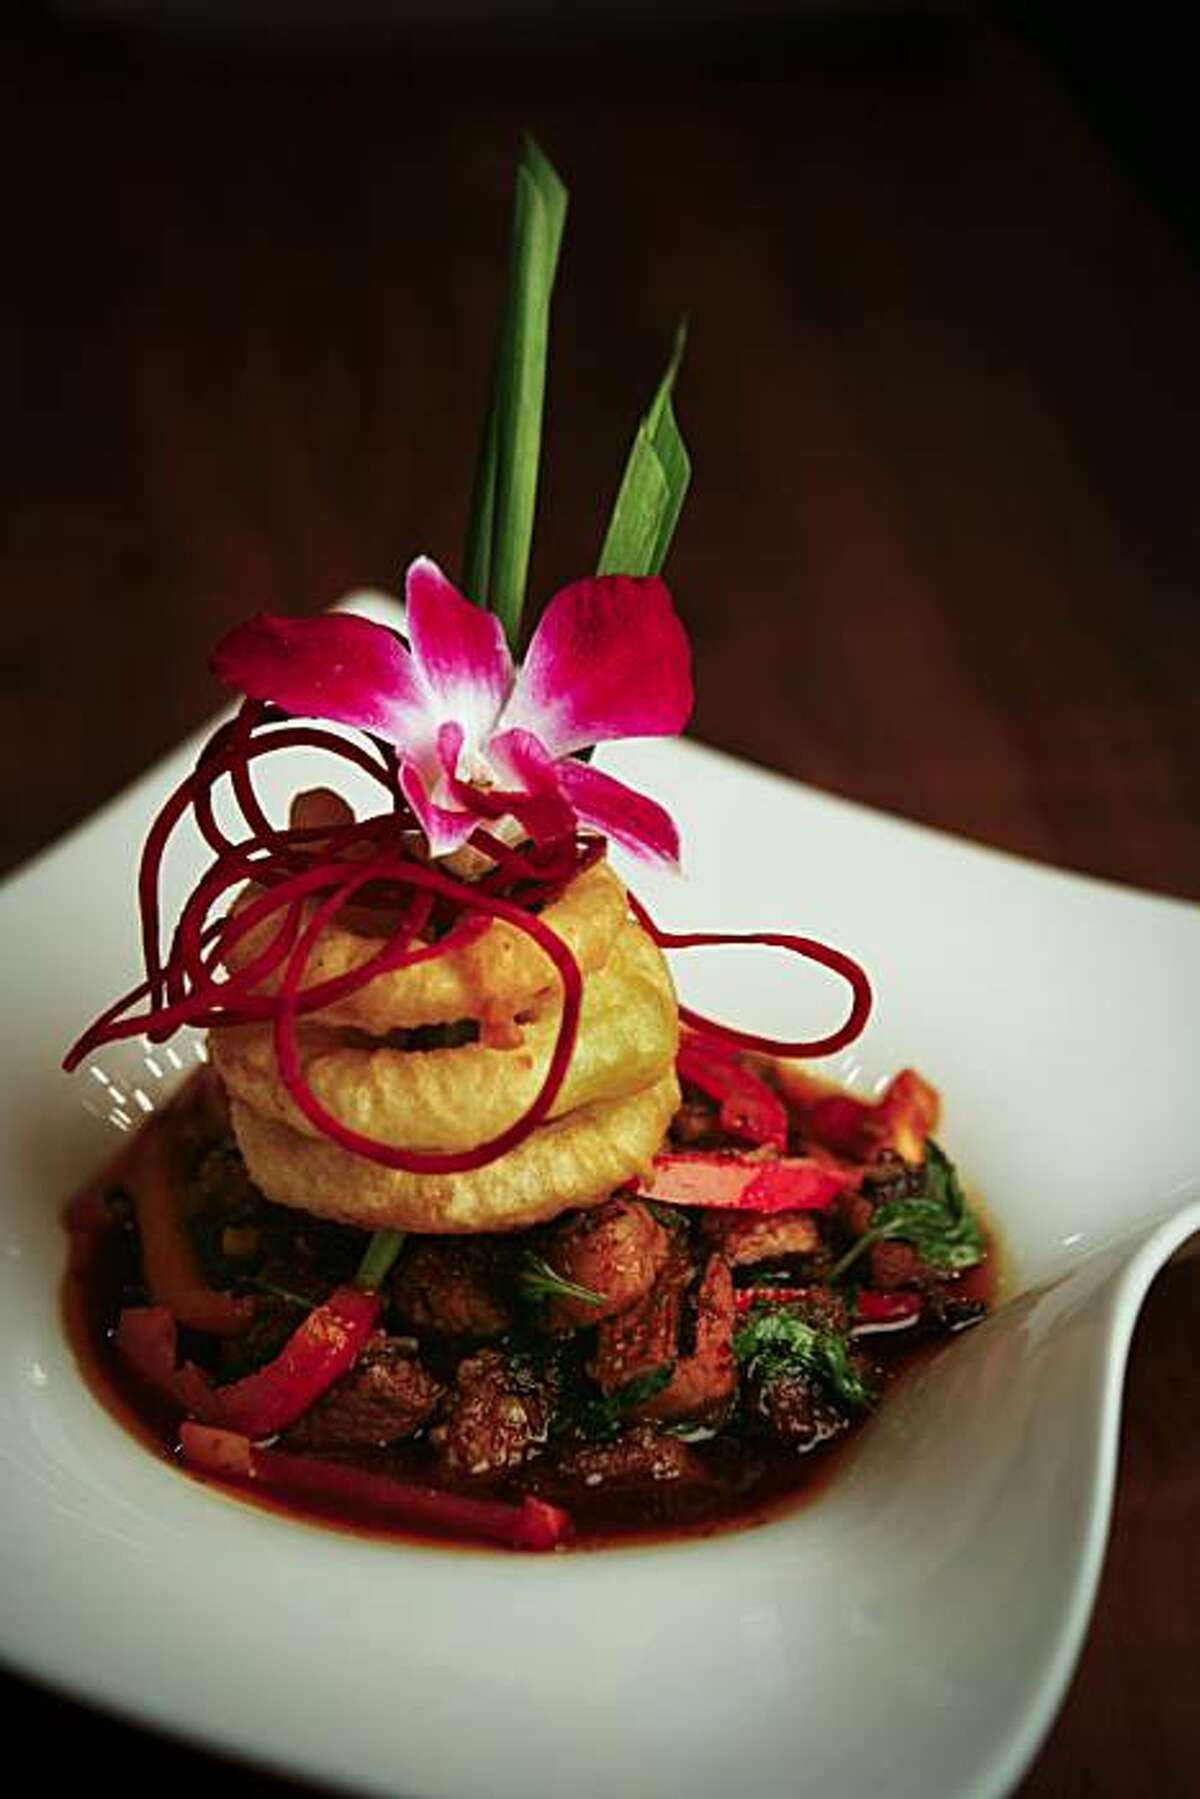 Volcanic Beef is Osha Thai Restaurant's signature dish. Sisters Laita Souksamlane and Wassana Korkhieola opened their first Osha Thai Restaurant in 1996. They will be opening their seventh location next week.